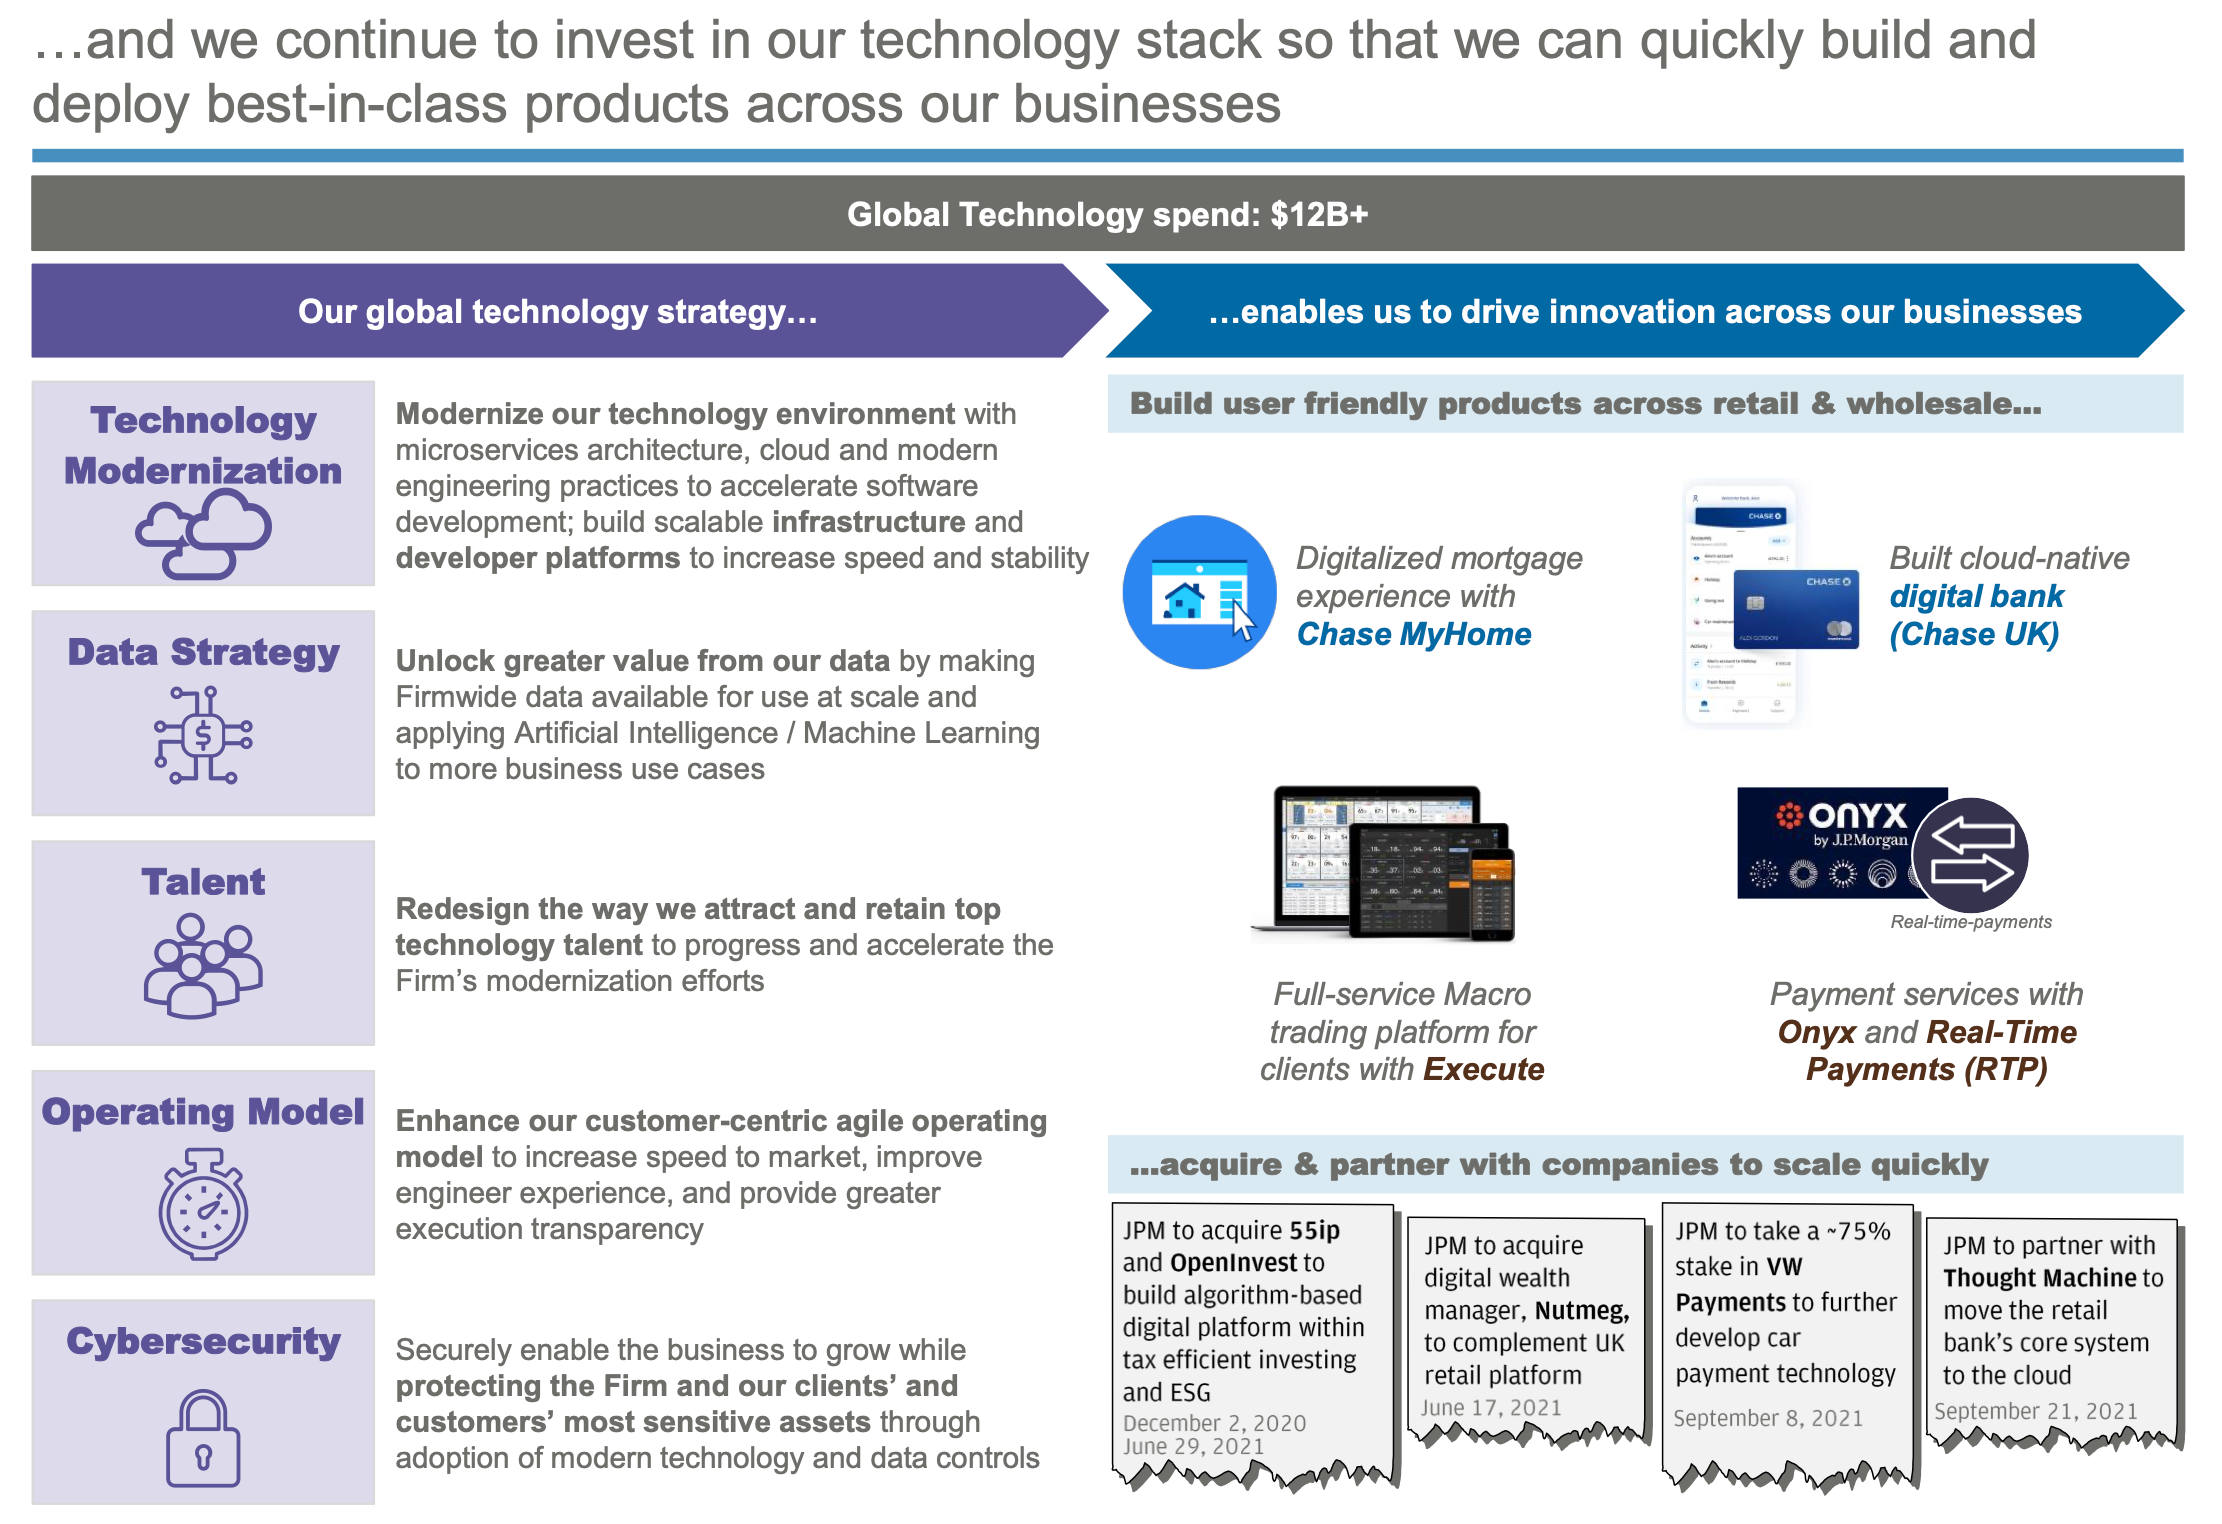 type of technology investments 2022 jp Morgan chase